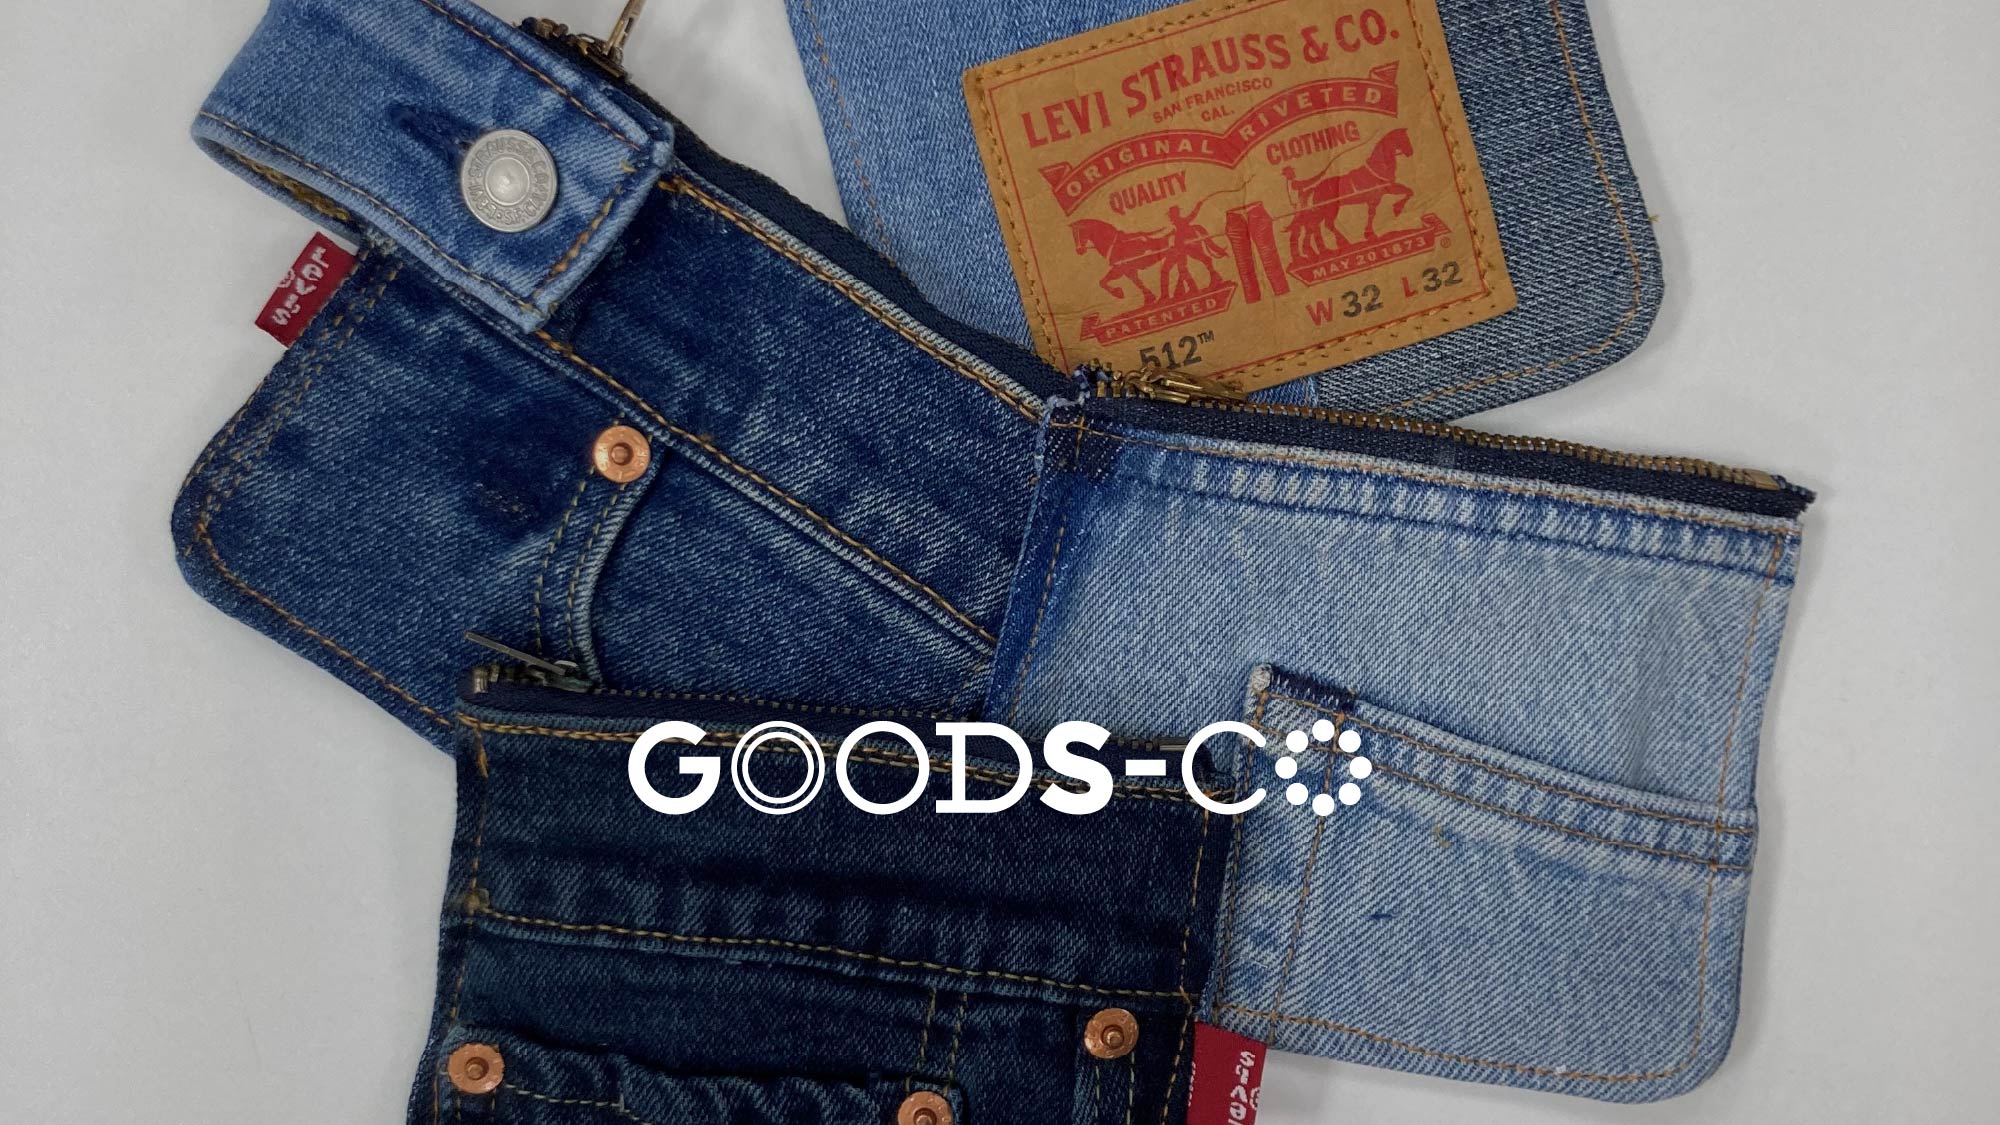 Give Old Jeans A New Life - Levi's Hong Kong